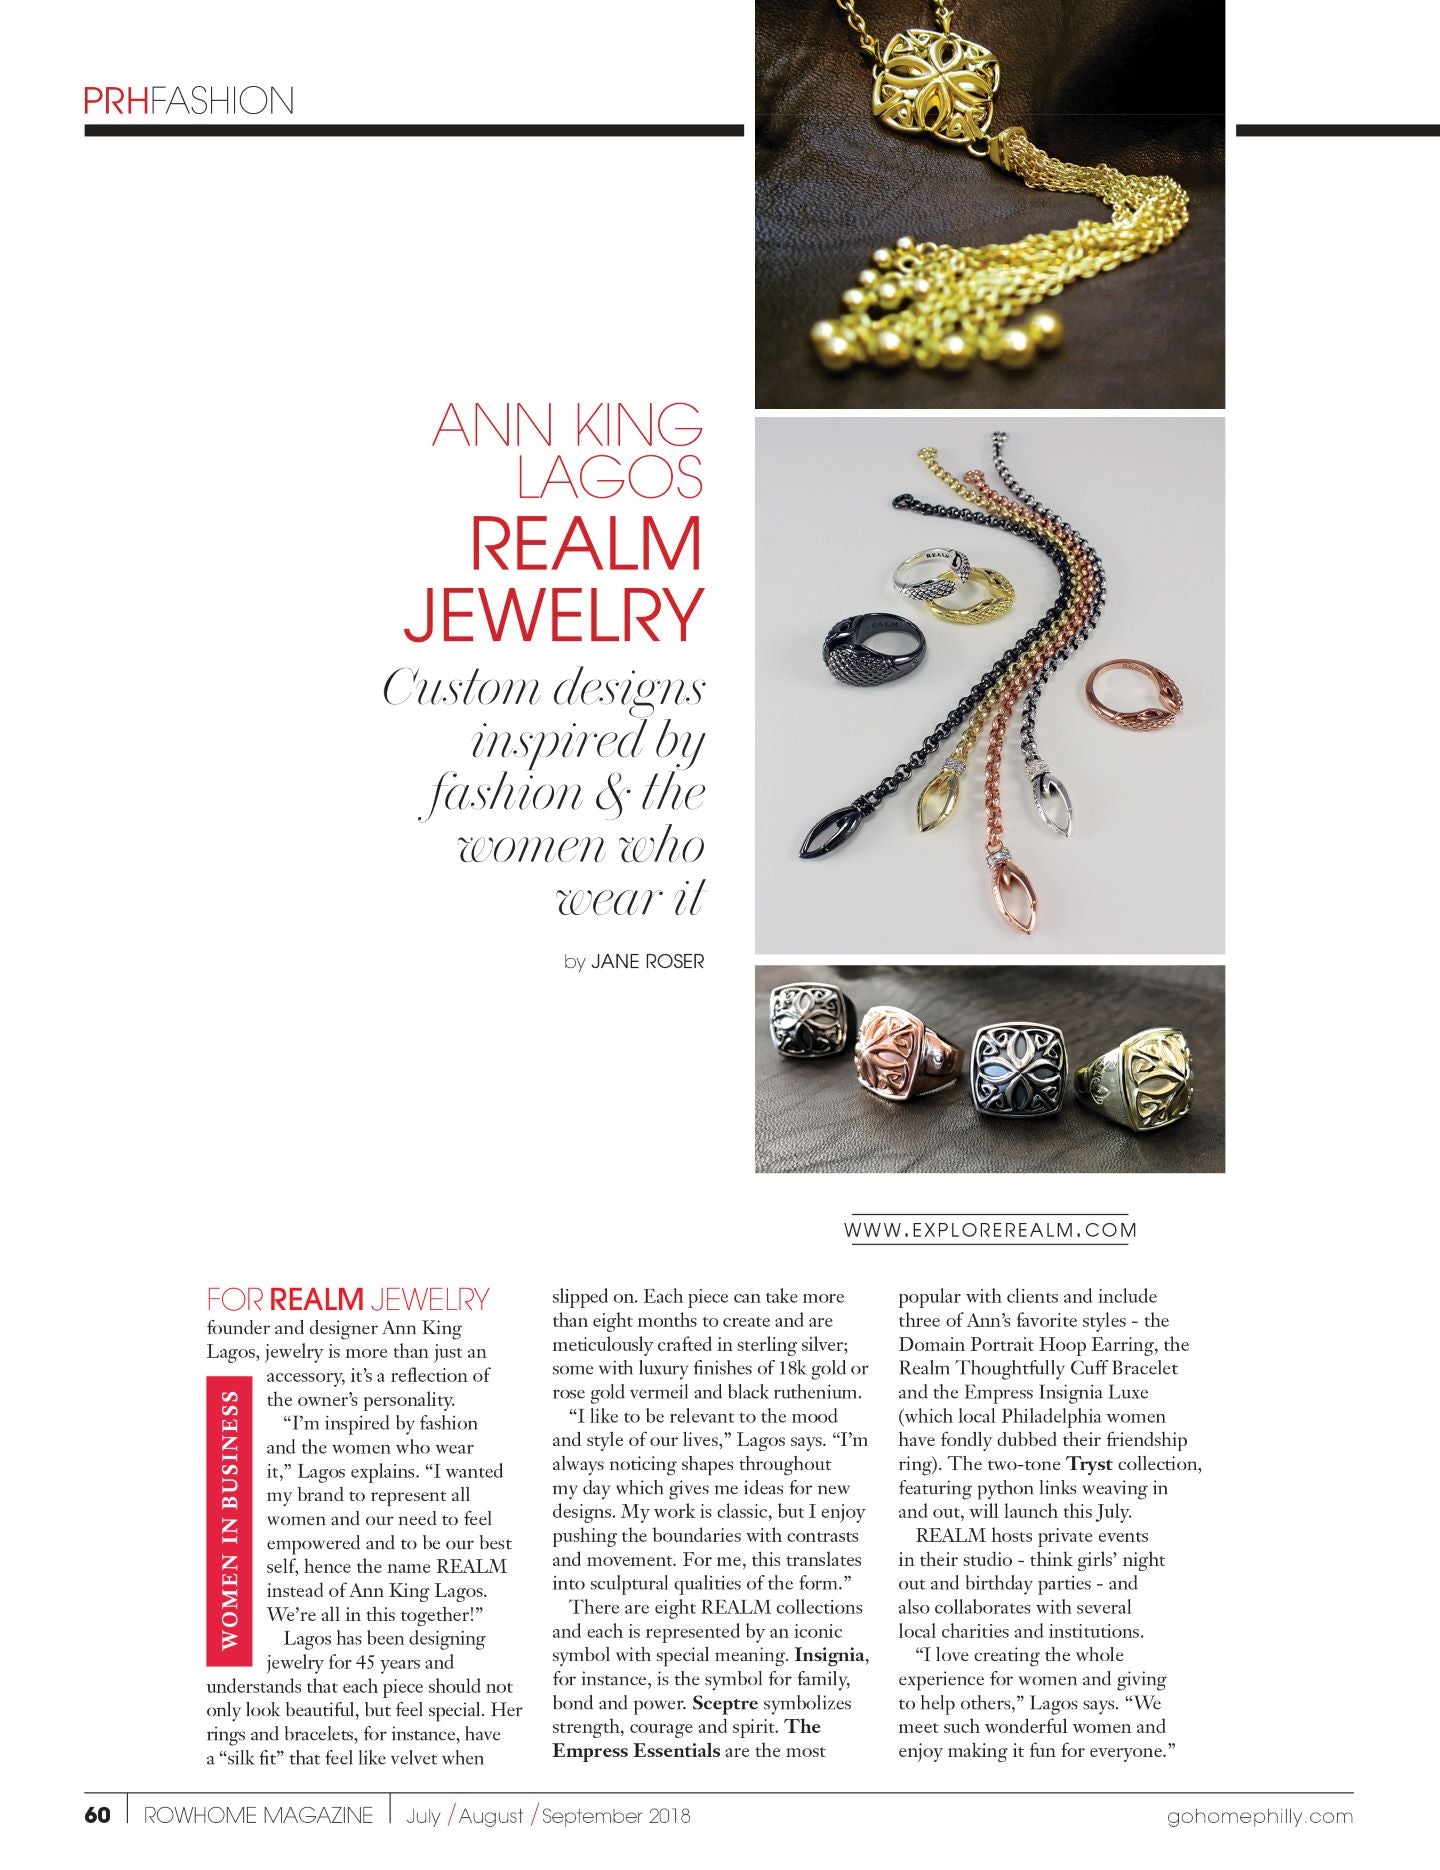 Philadelphia Rowhome Magazine interviews Ann King Lagos and features REALM Fine + Fashion Jewelry in Summer 2018 issue